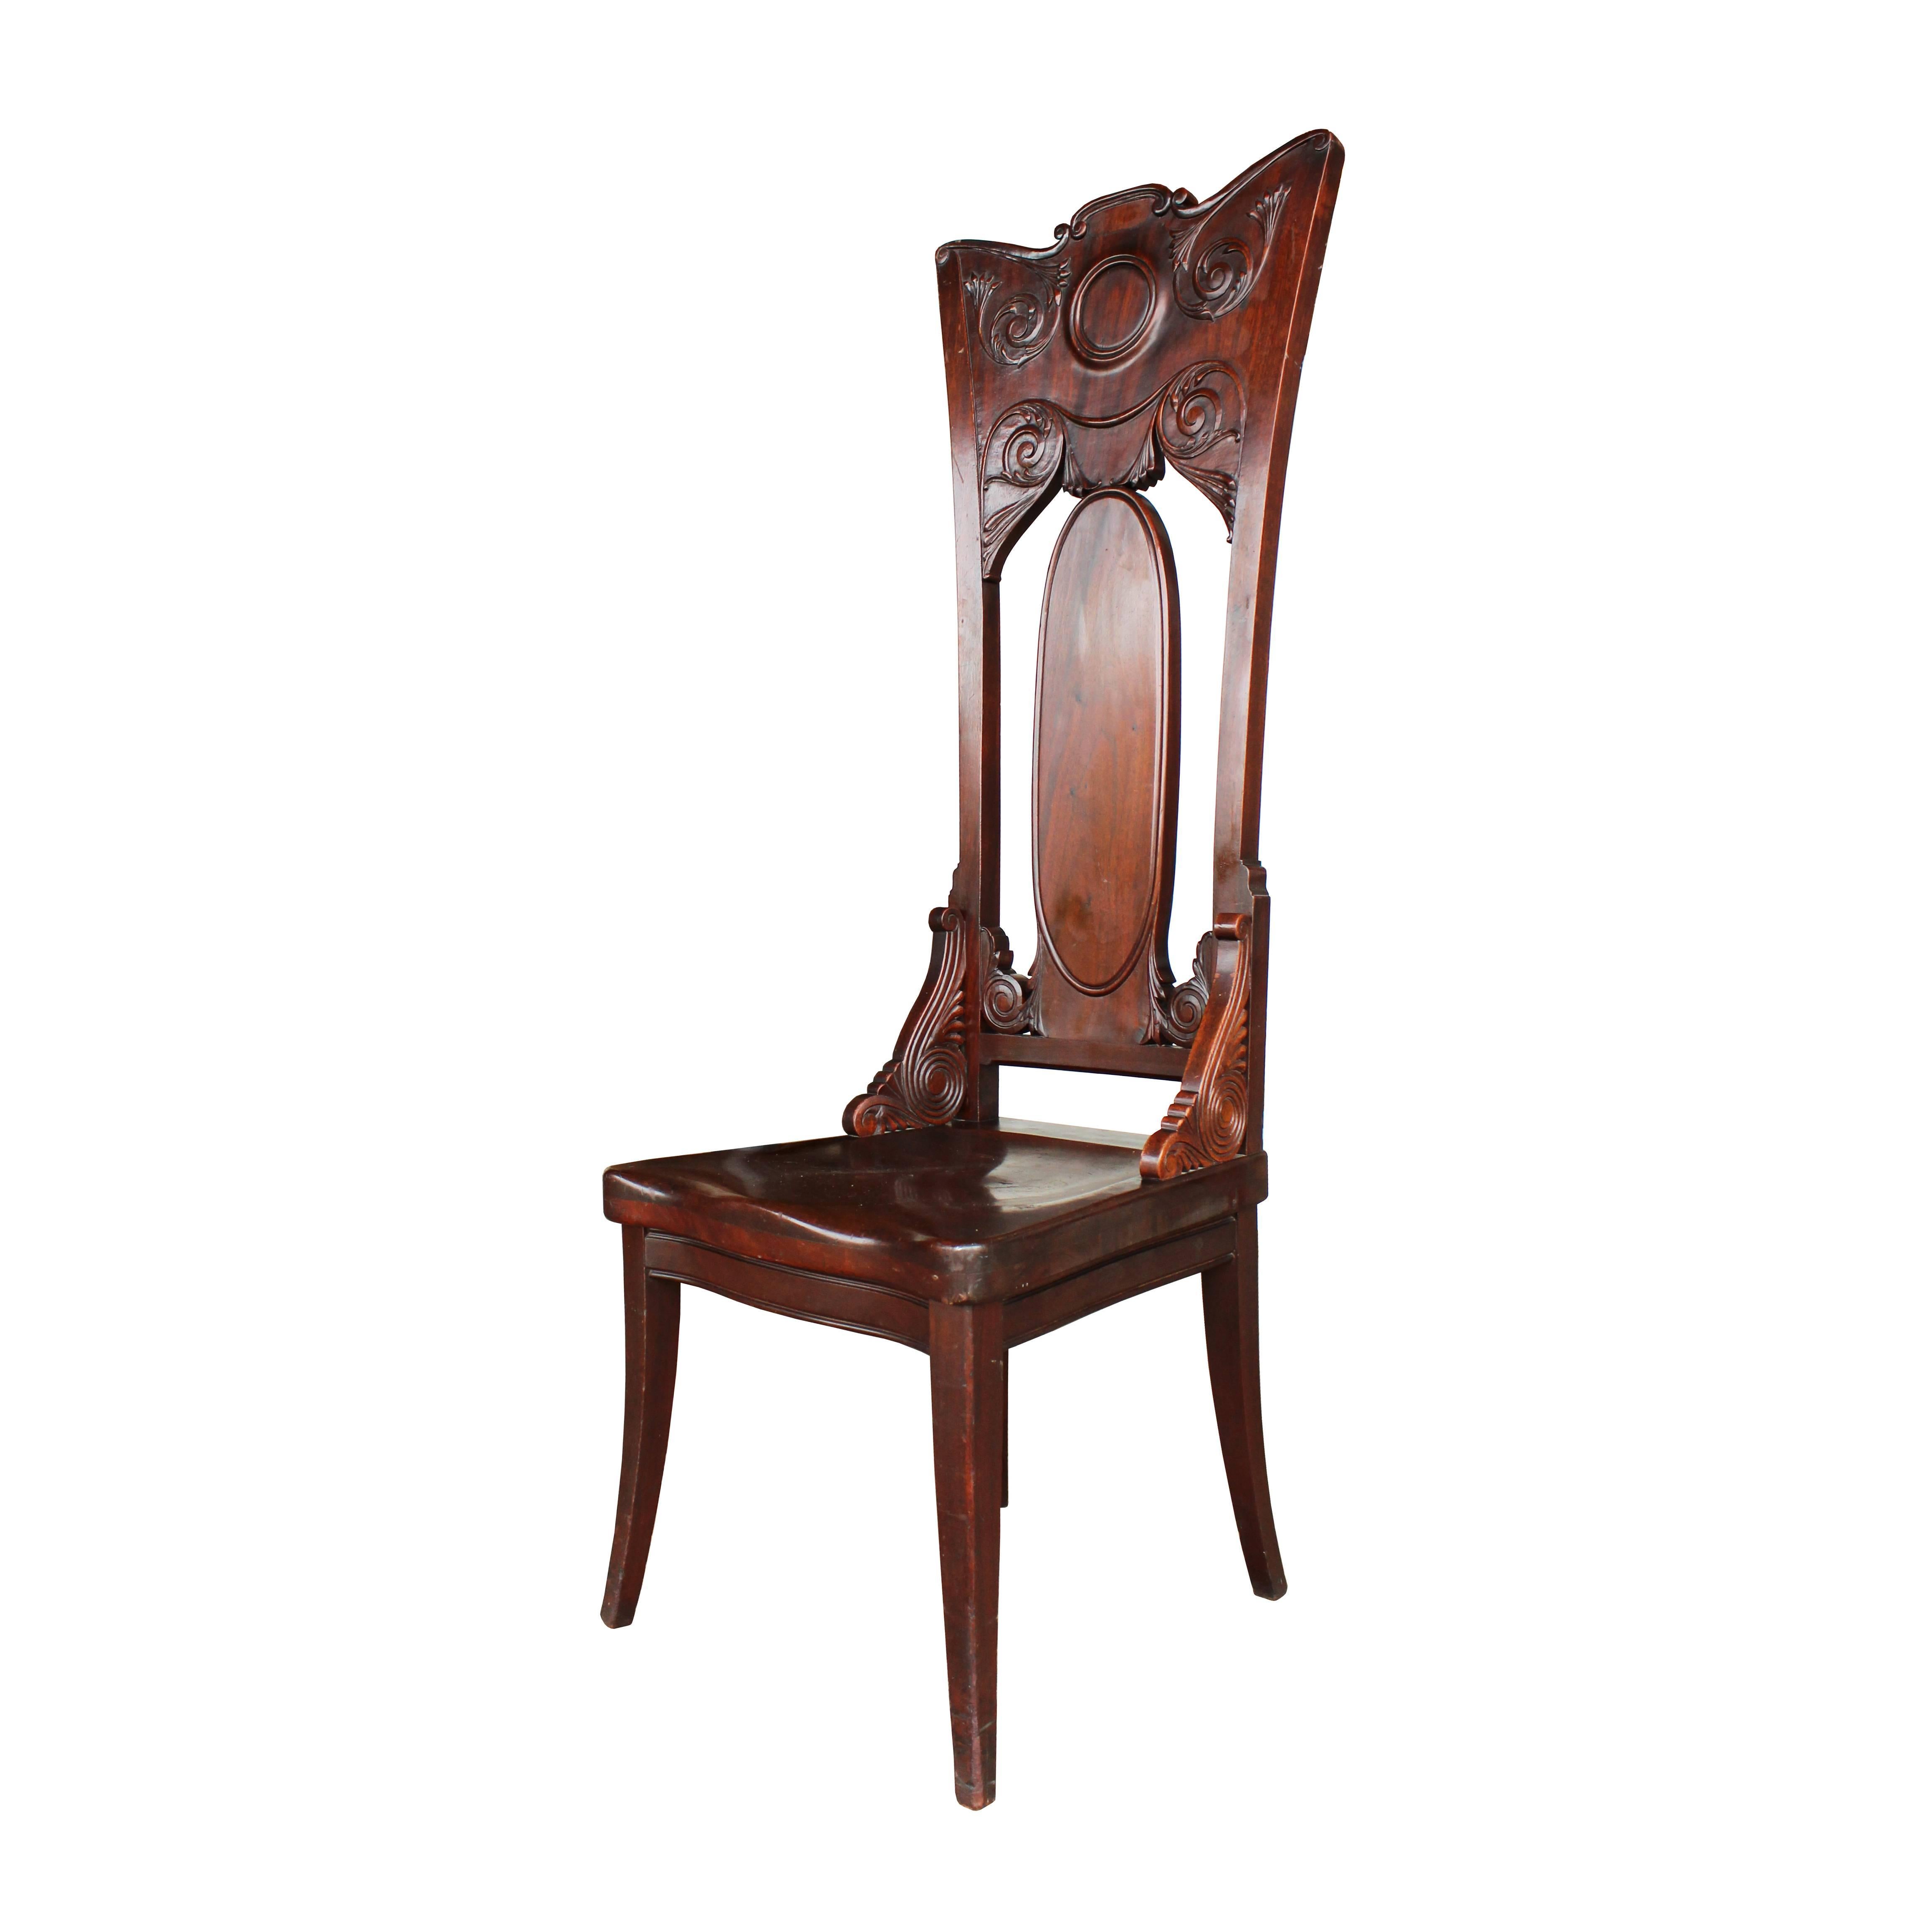 These chairs have a presence all their own with floriated scroll work carving and whimsically curved backs bringing Victorian charm and Art Nouveau fluidly together. Open backs are perforated with a central ovoid back slat and are connected to a